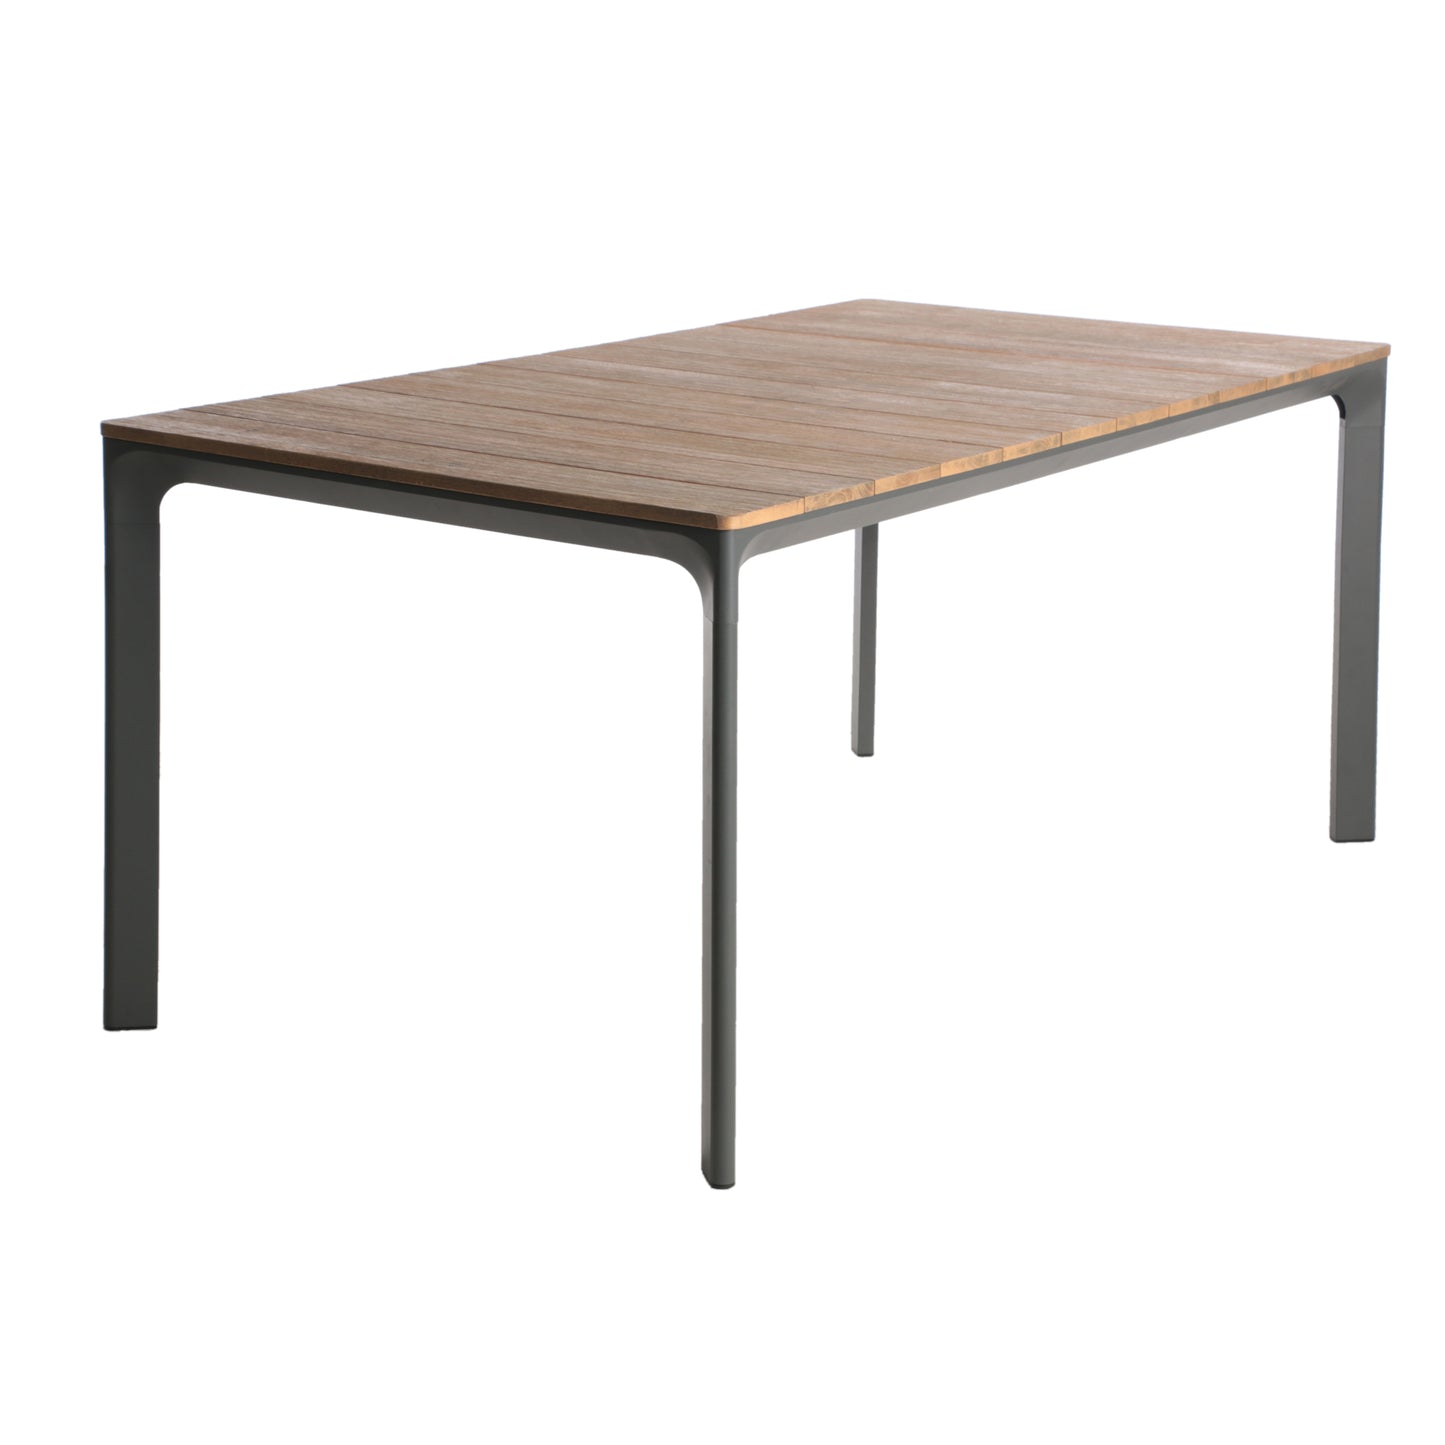 Jace Outdoor Aluminum and Wood Dining Table, Natural